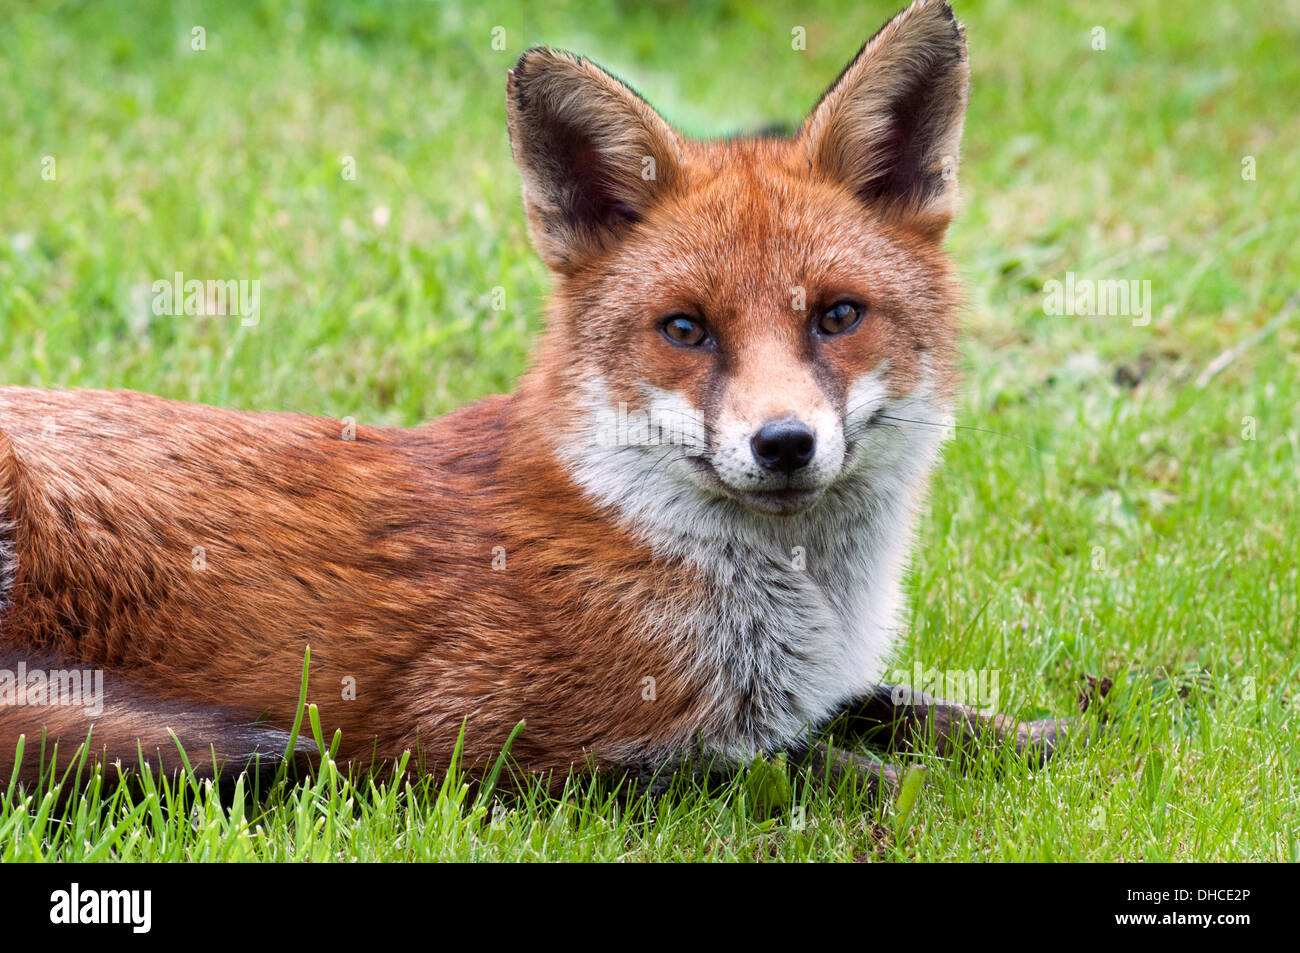 Red_Fox_Vulpes_vulpes_on_a_lawn_in_an_ur